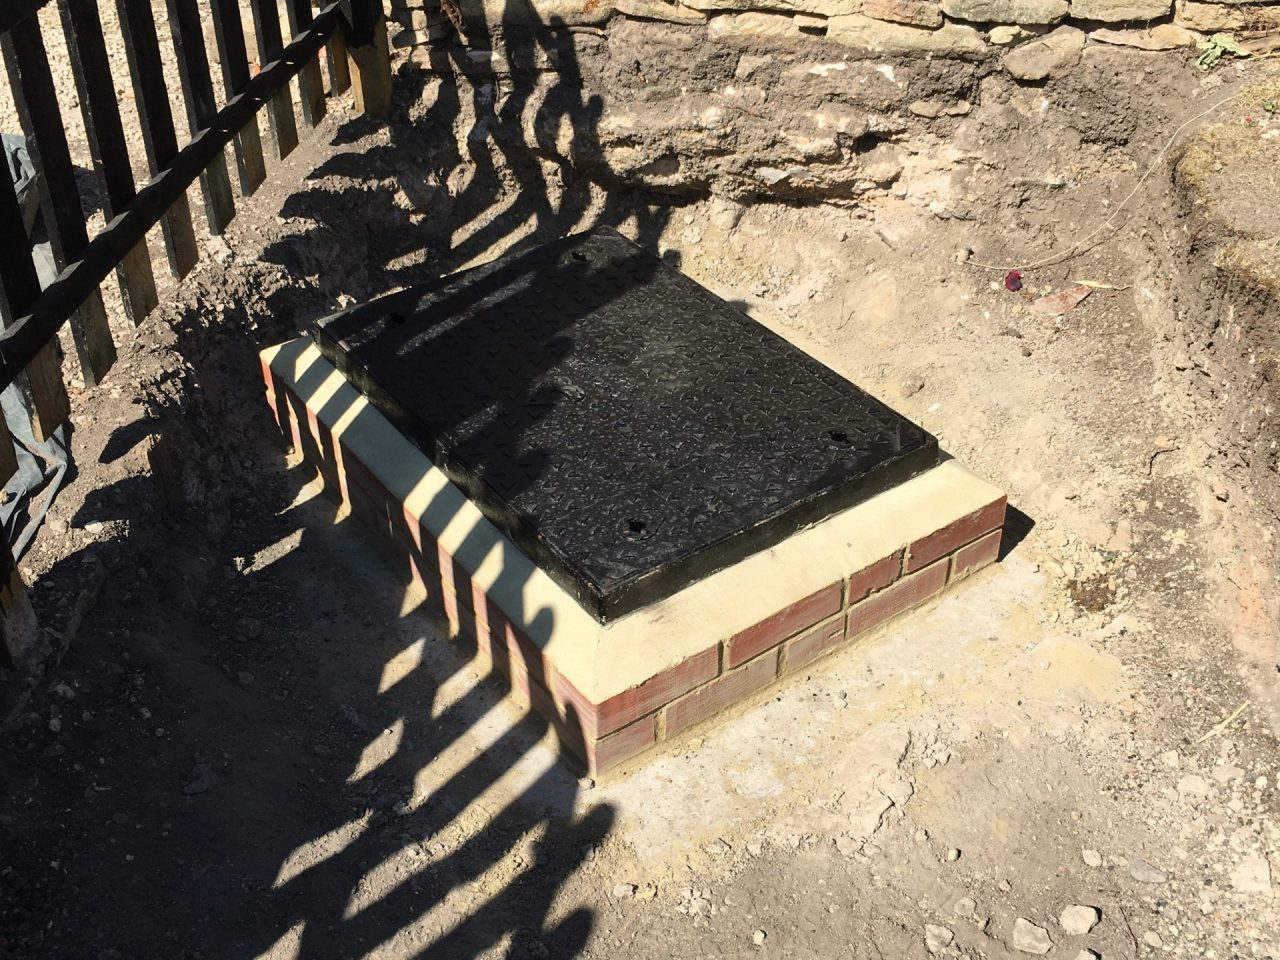 New man hole cover fitted, ready for back filling